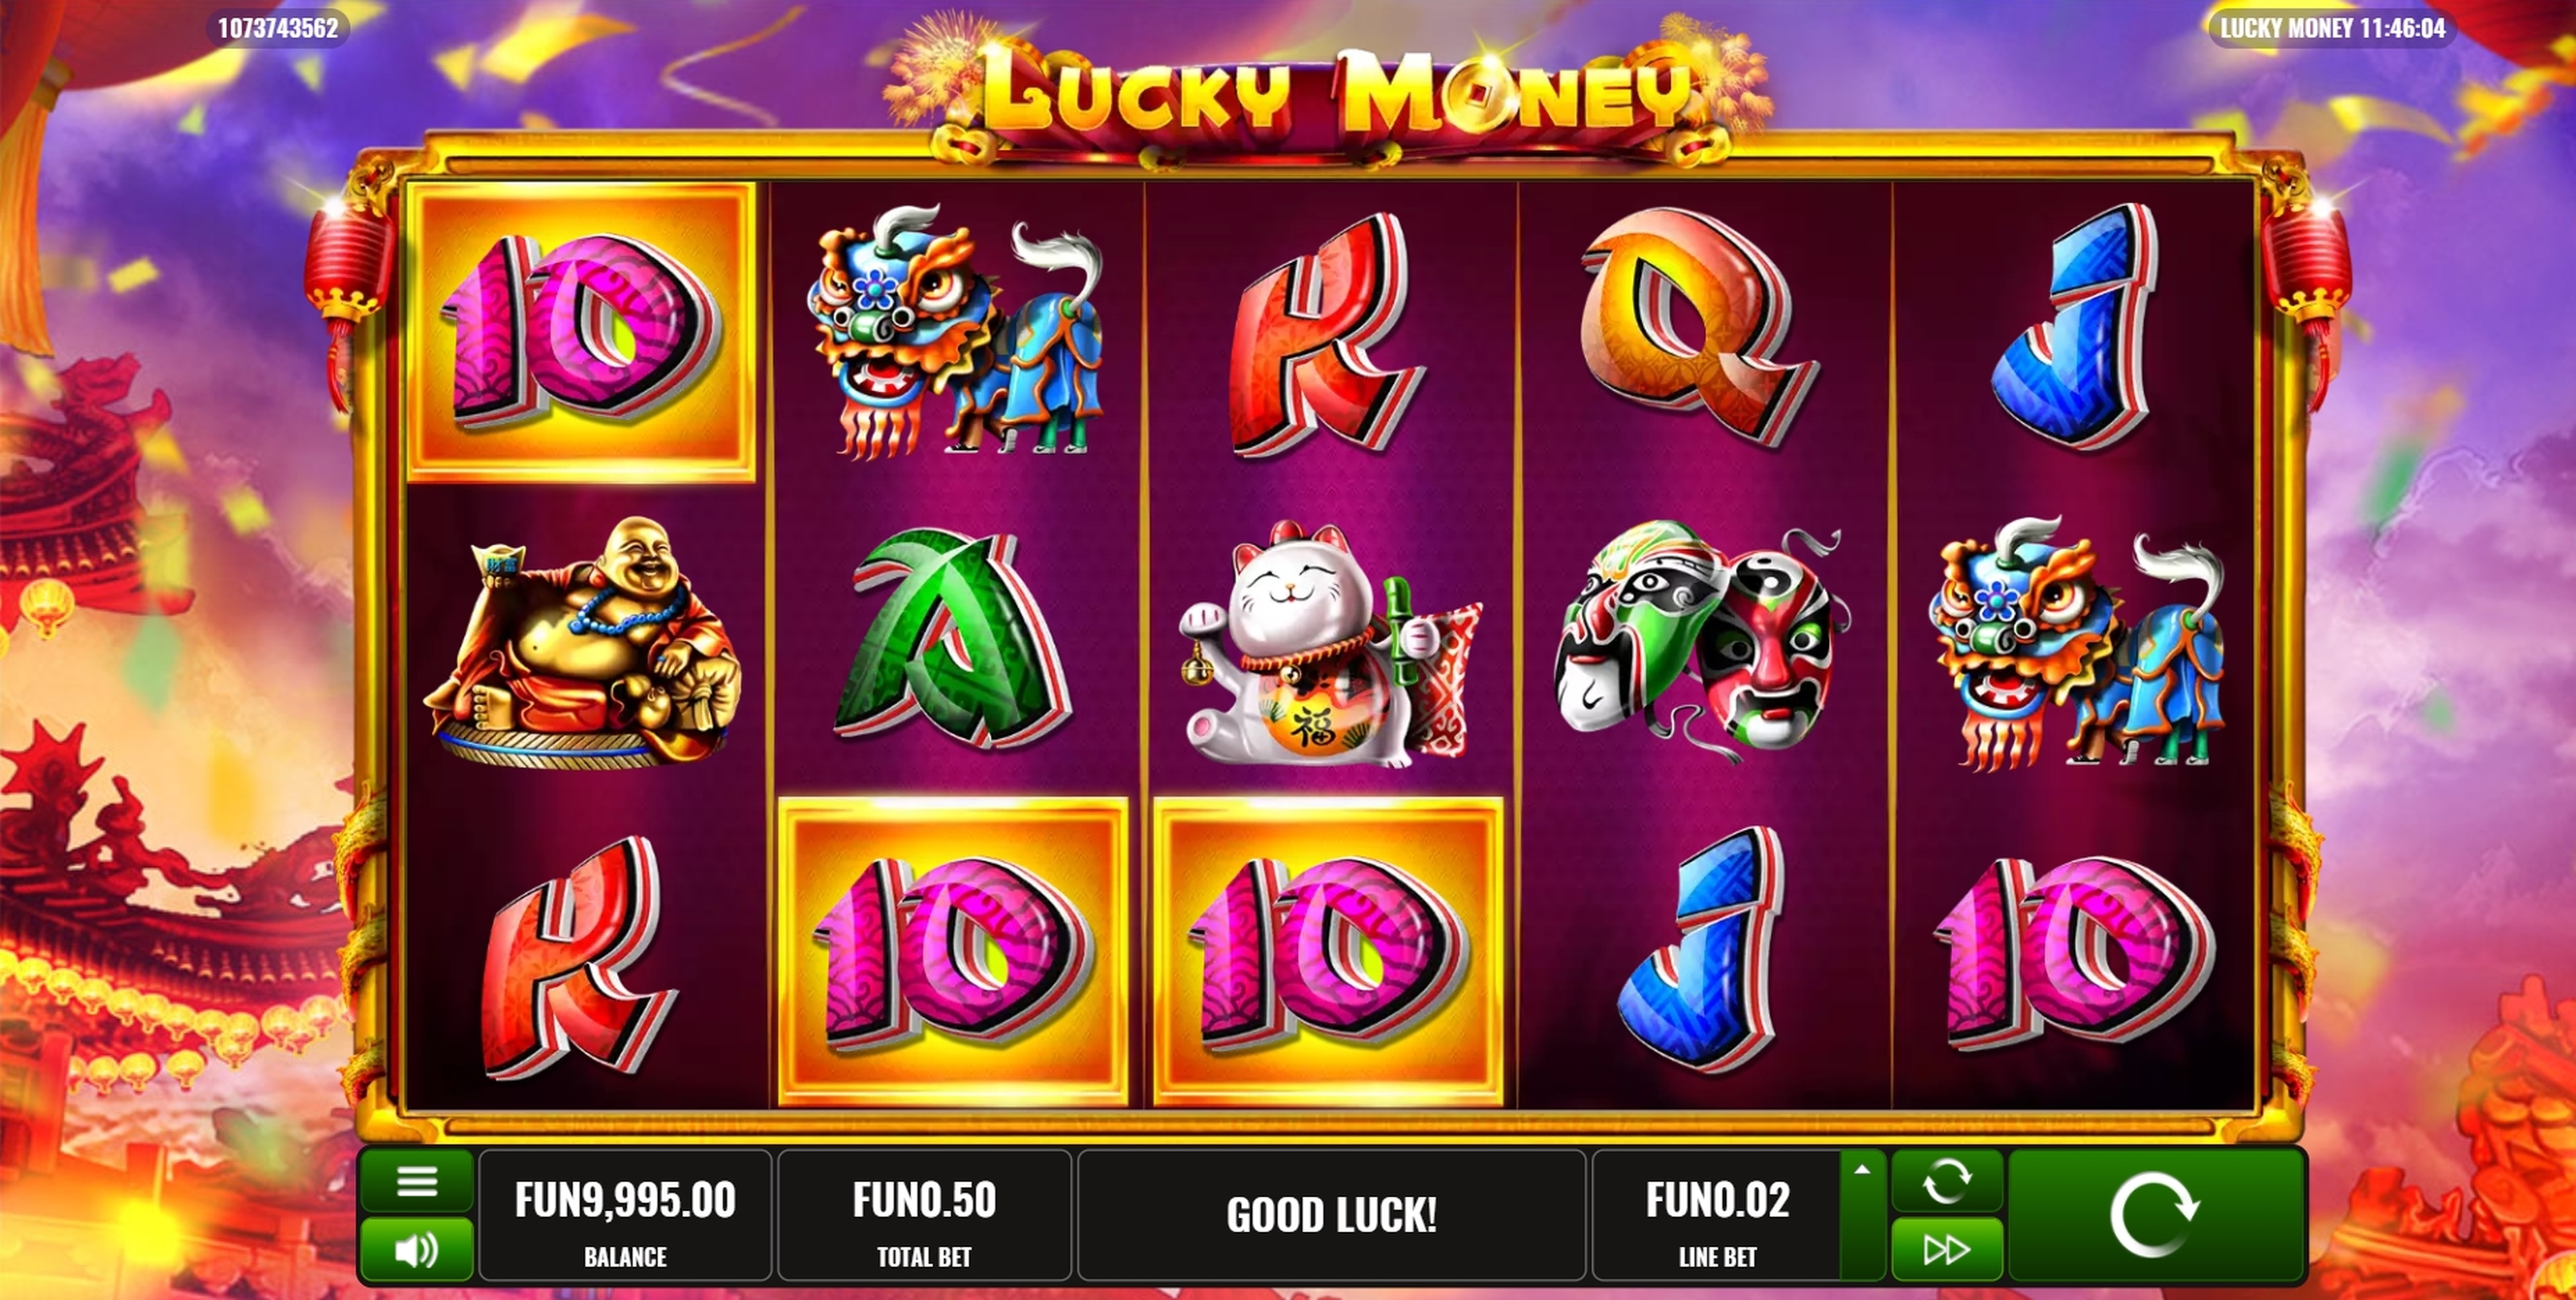 Win Money in Lucky money Free Slot Game by Platipus